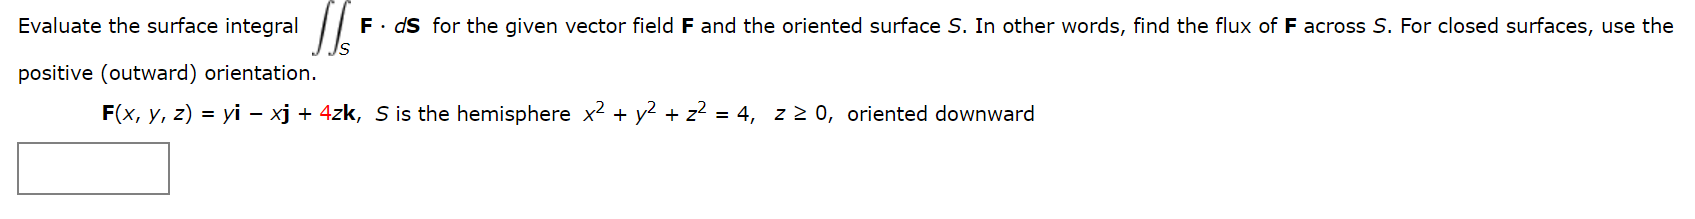 Evaluate the surface integral
F. dS for the given vector field F and the oriented surface S. In other words, find the flux of F across S. For closed surfaces, use the
positive (outward) orientation.
F(x, y, z) = yi – xj + 4zk, S is the hemisphere x² + y?
+ z2 = 4, z 2 0, oriented downward
